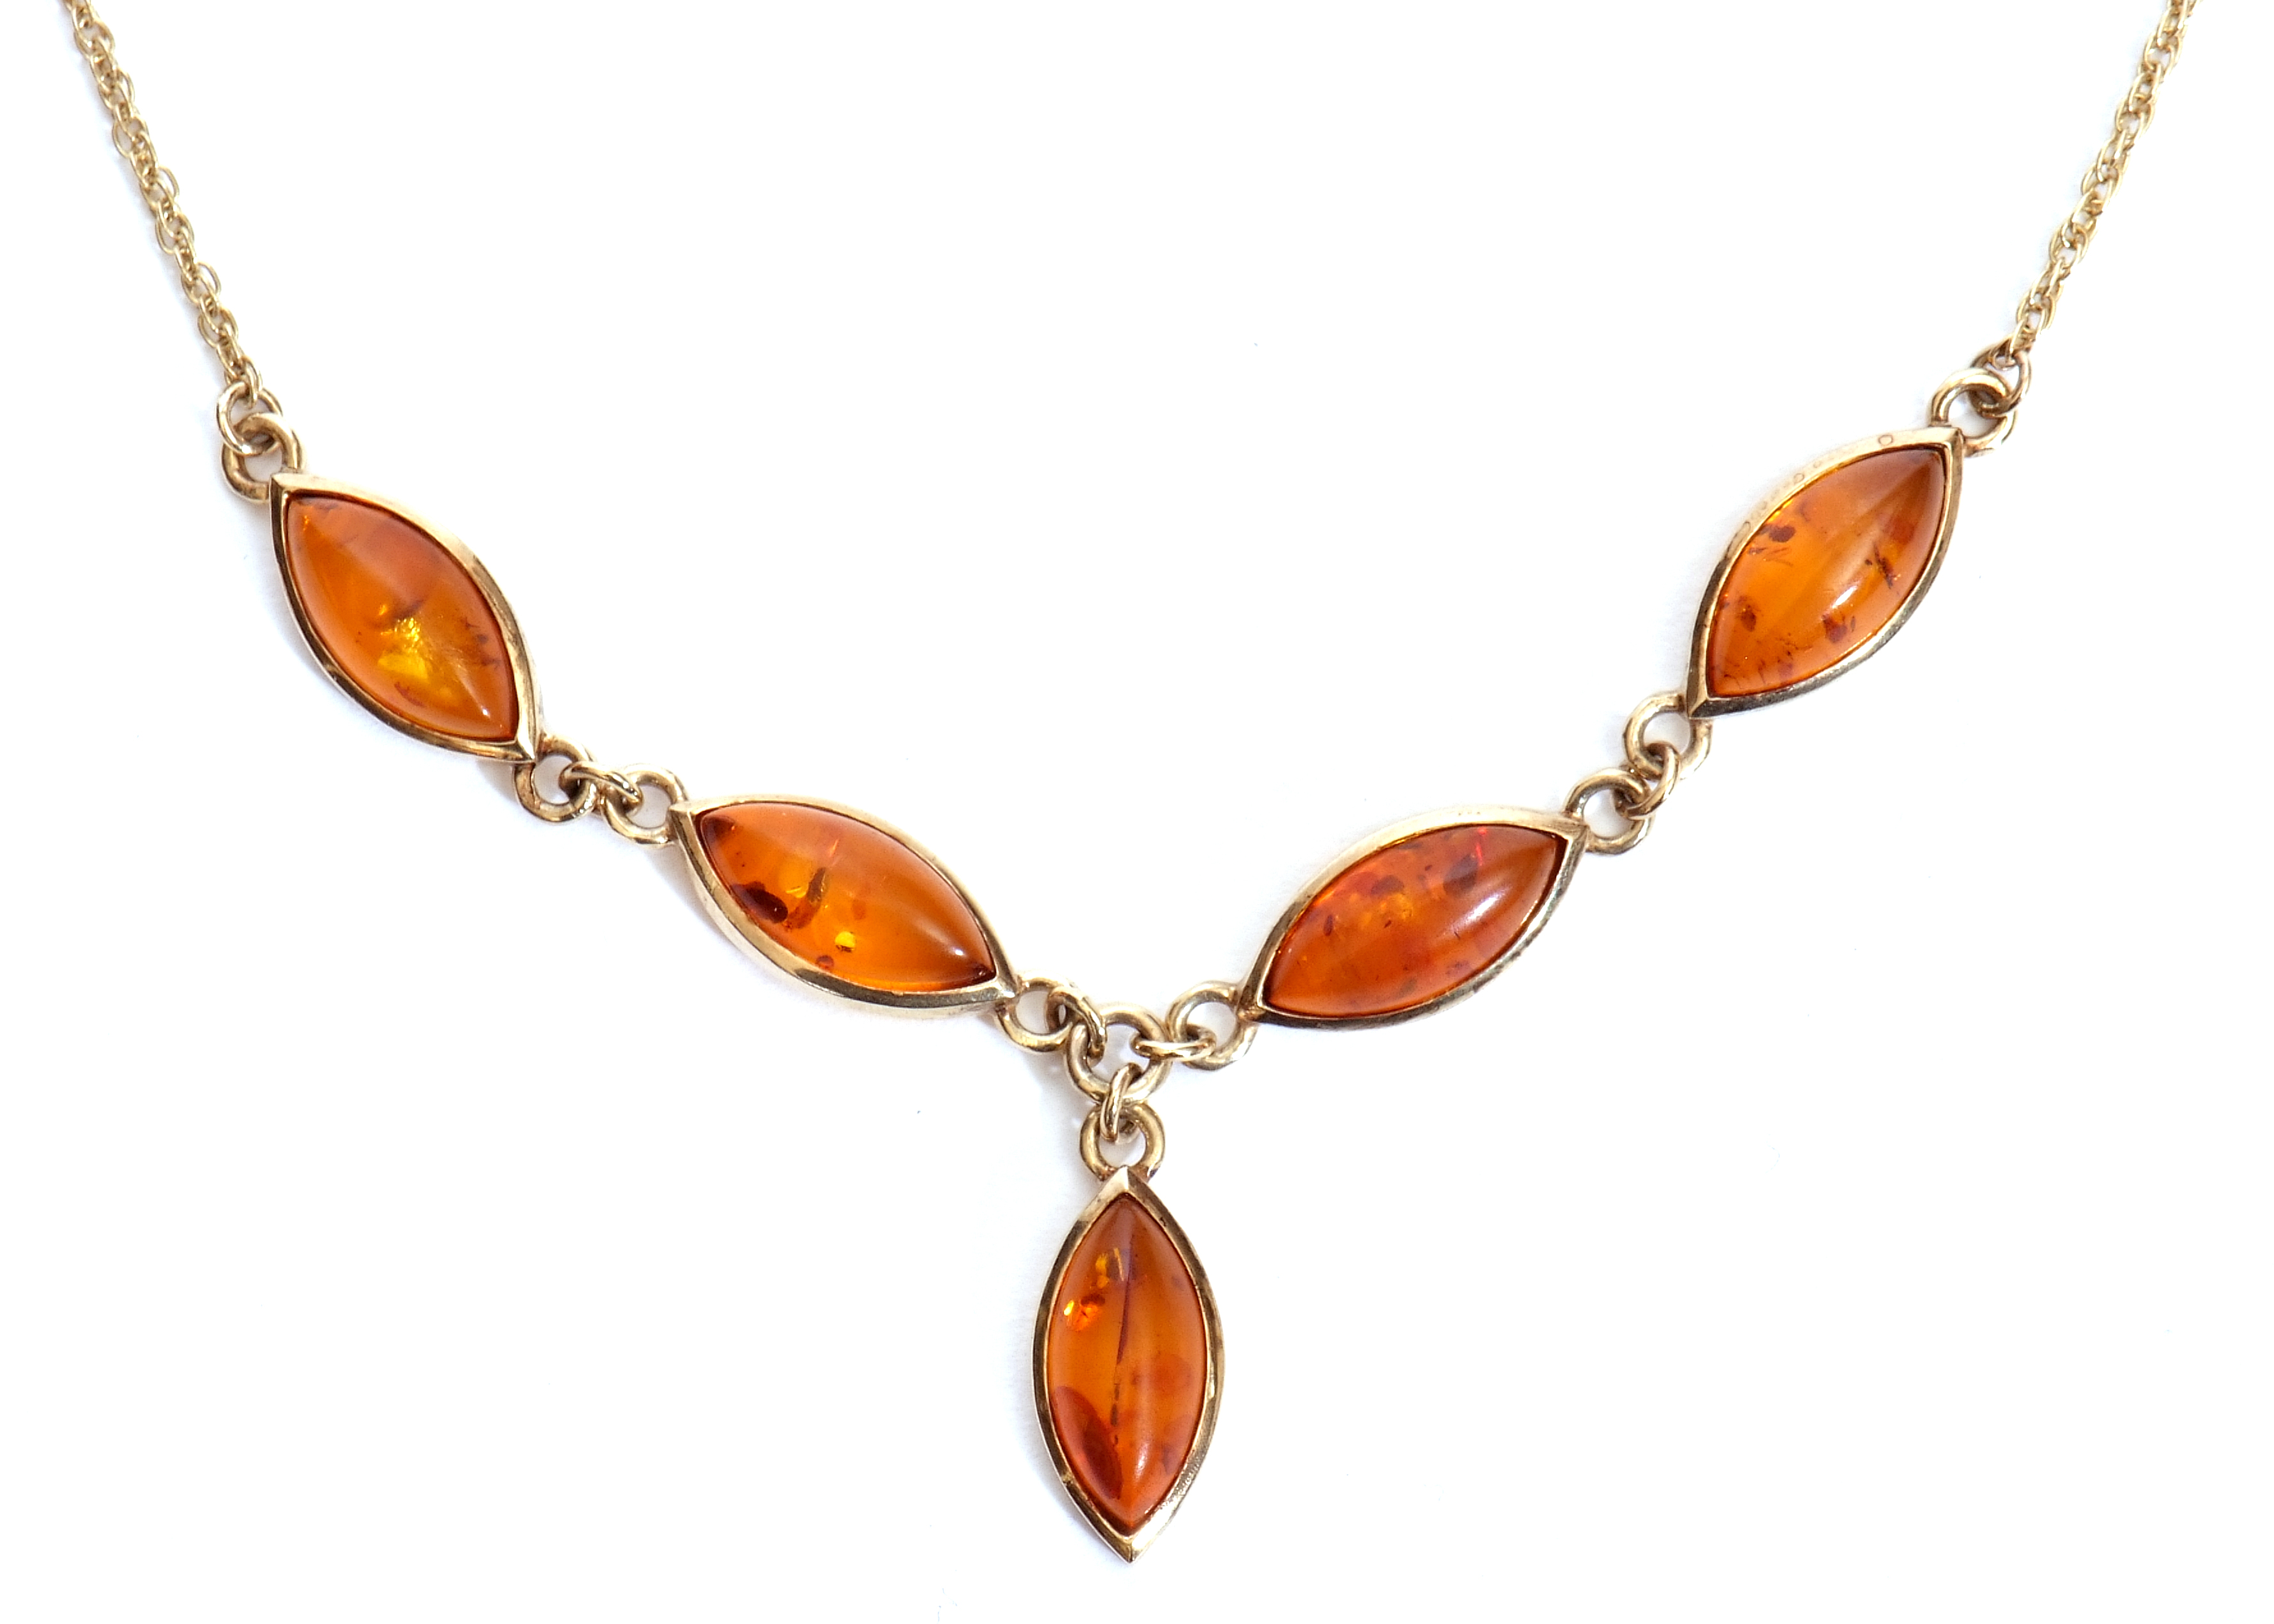 Modern yellow metal and amber necklace, a design featuring four lozenge shaped links and a